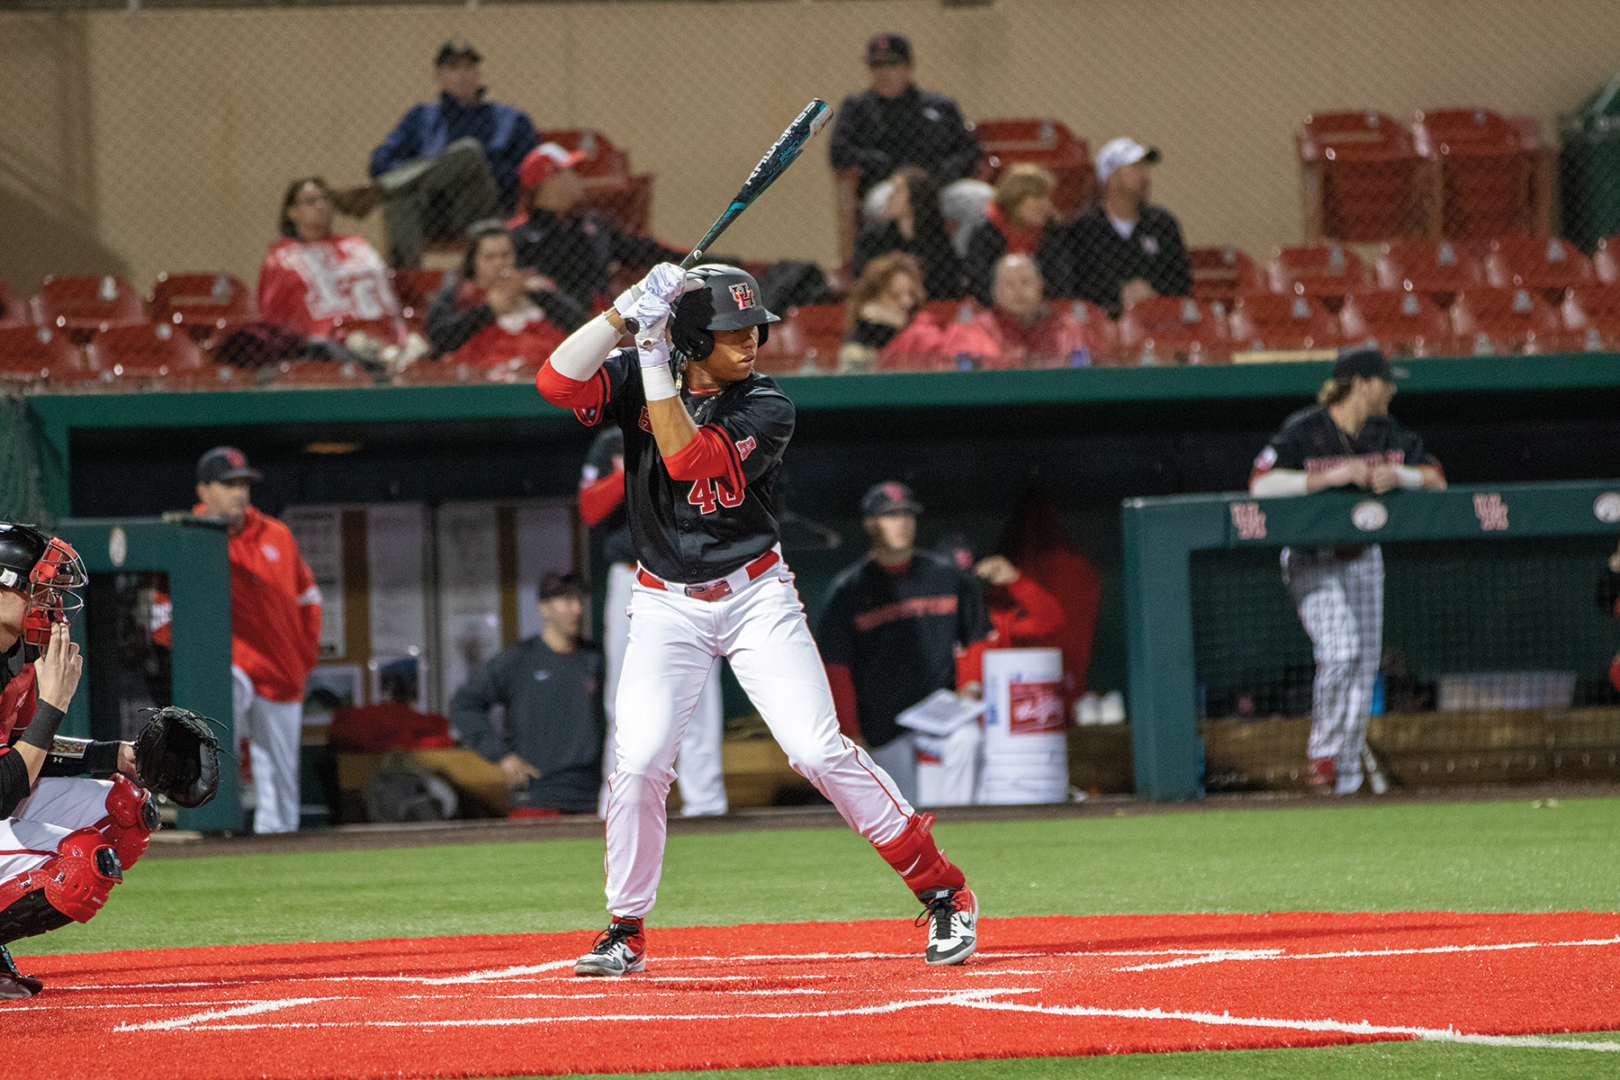 Ryan Hernandez's UH debut during Houston's opening weekend against Youngstown State saw the junior first baseman earn five hits, including two home runs. | Jhair Romero/The Cougar